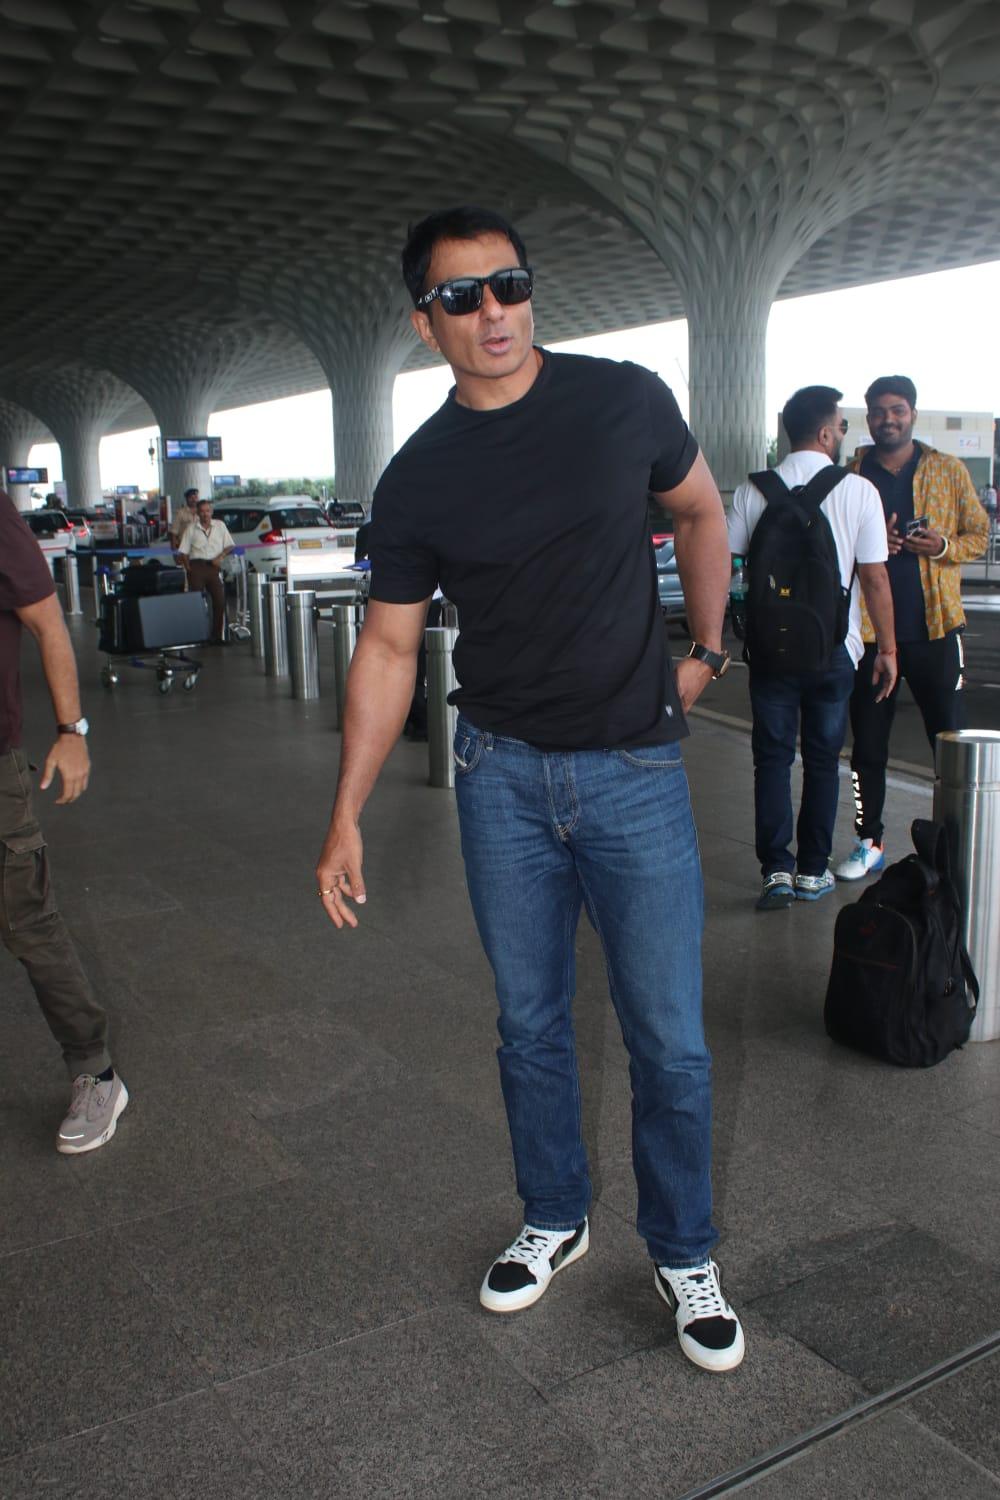 Sonu Sood was spotted at the airport wearing a stylish black T-shirt paired with blue jeans